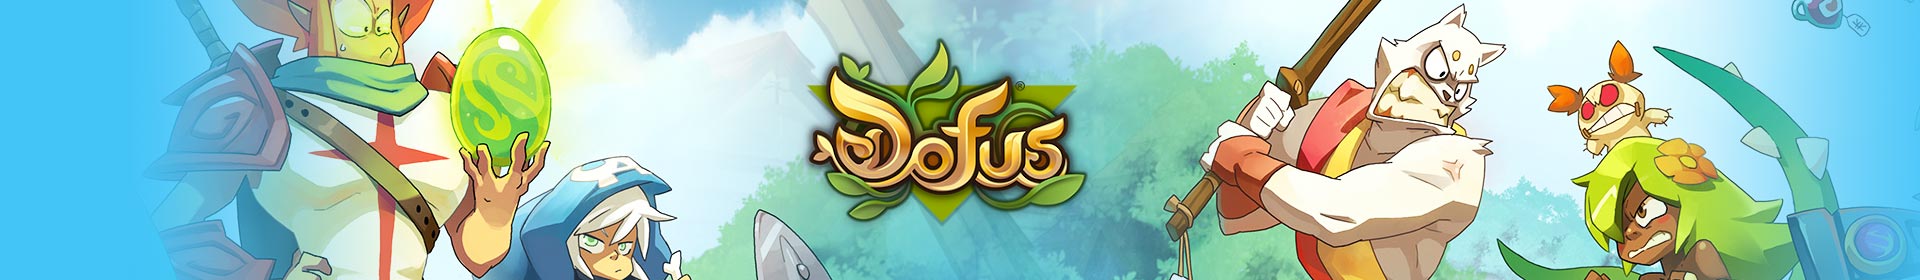 Dofus Touch Goultines